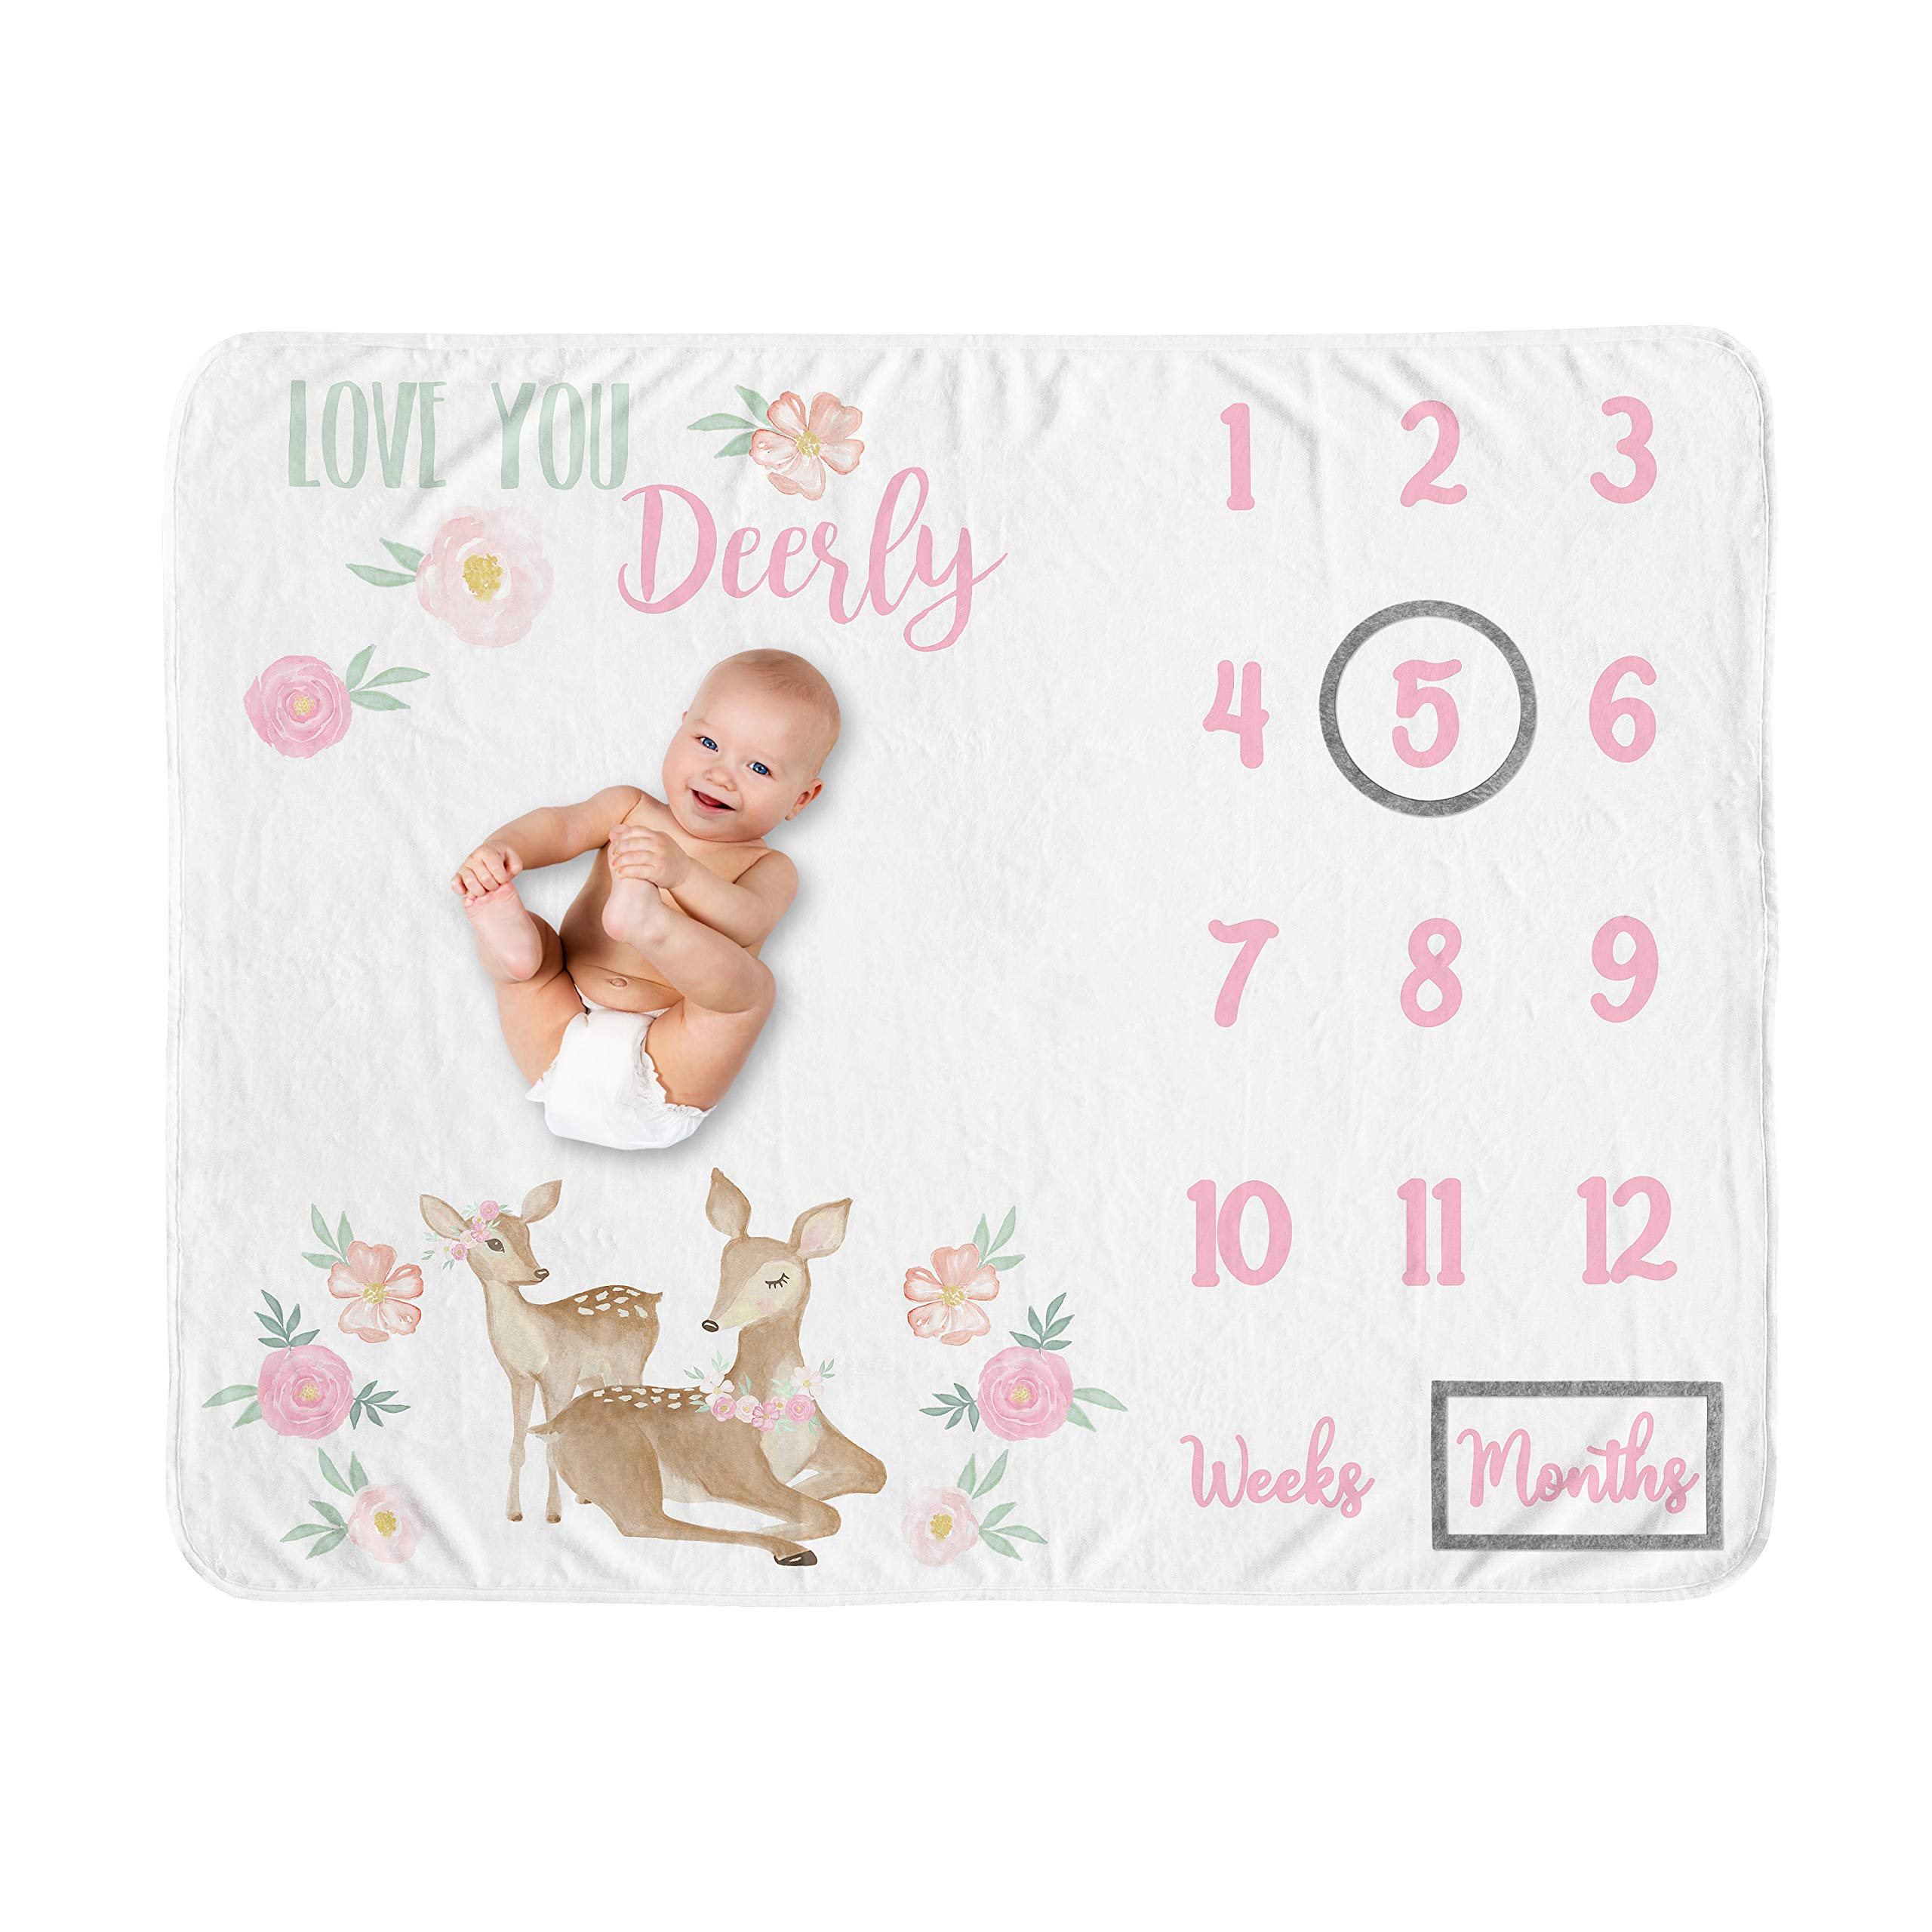 Sweet Jojo Designs Woodland Deer Girl Milestone Blanket Monthly Newborn First Year Growth Mat Baby Shower Memory Keepsake Gift Picture - Blush Pink Mint Green Boho Watercolor Forest Love You Deerly